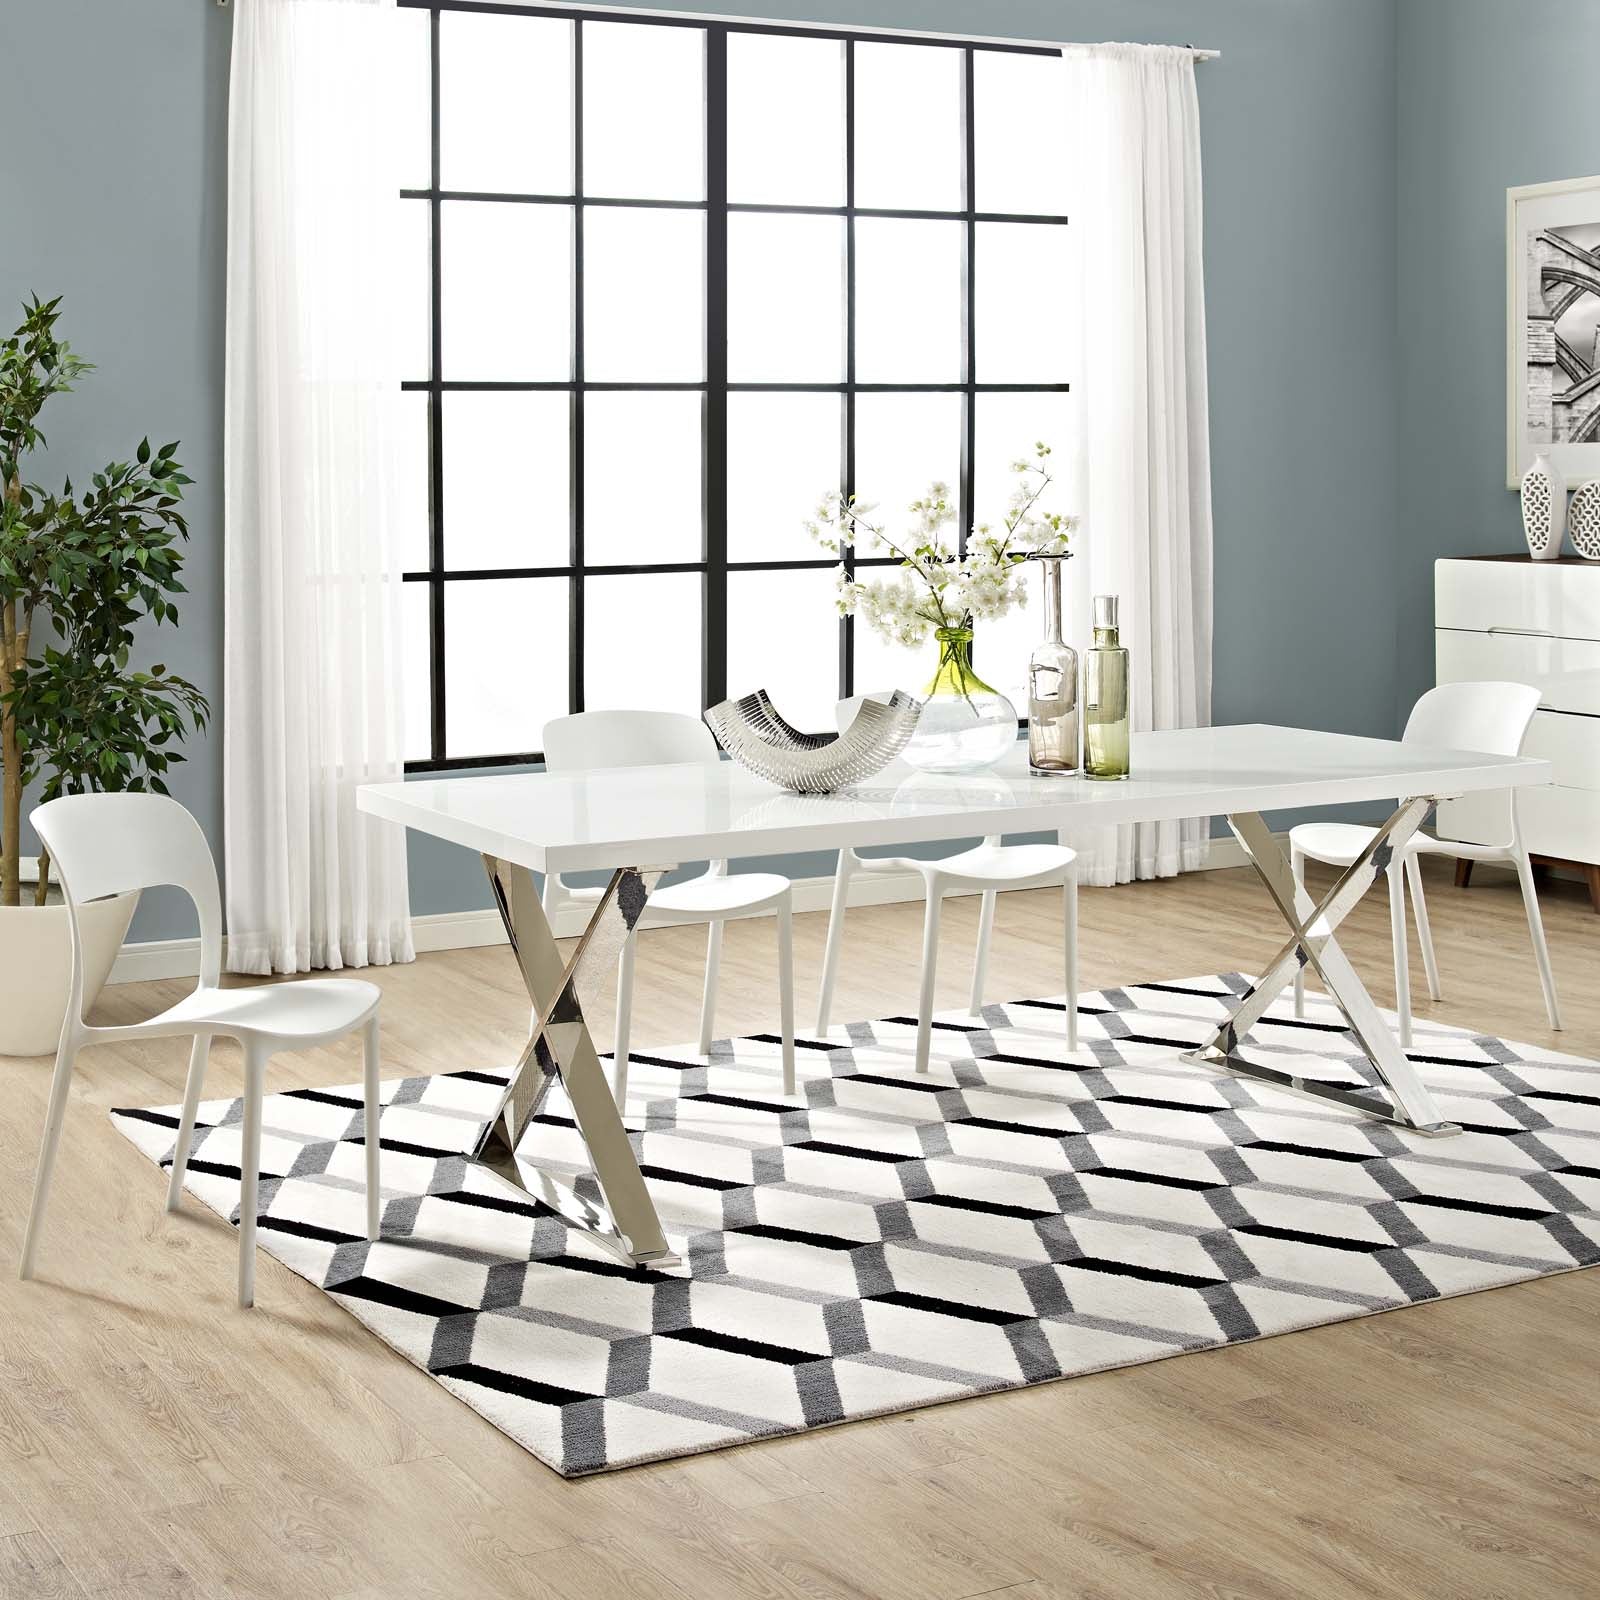 Sector Dining Table - East Shore Modern Home Furnishings